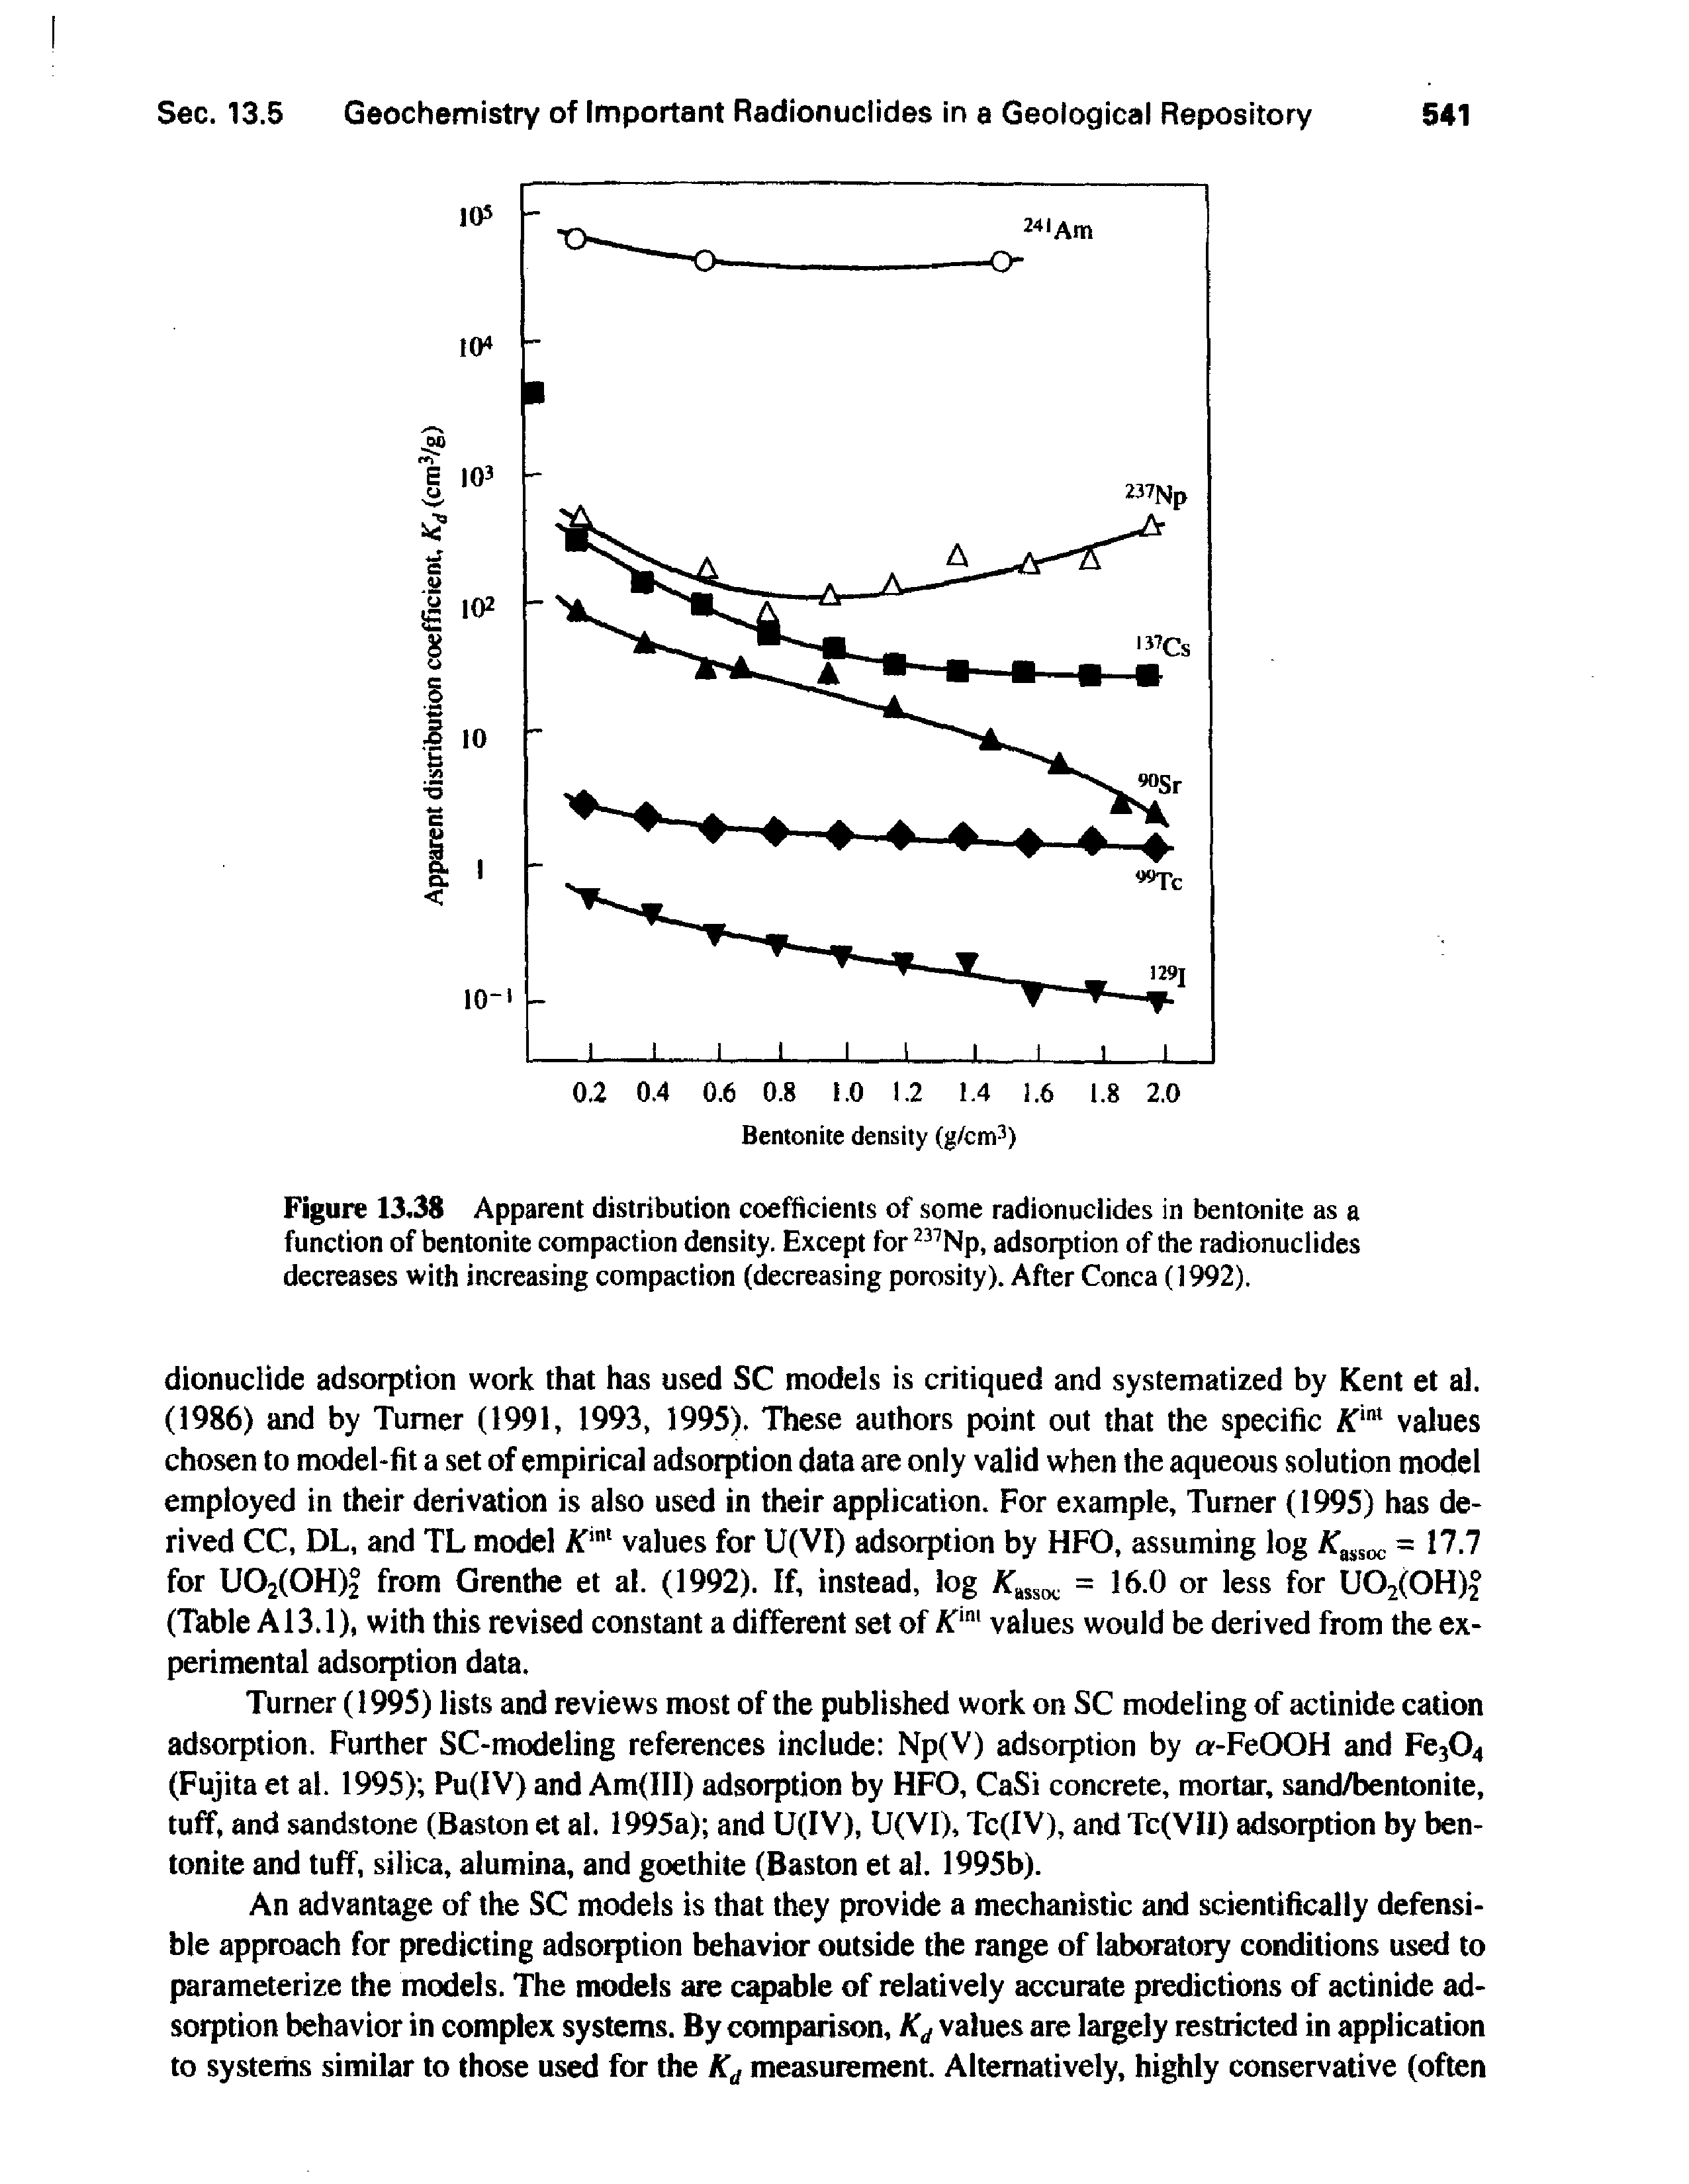 Figure 13.38 Apparent distribution coefficients of some radionuclides in bentonite as a function of bentonite compaction density. Except for Np, adsorption of the radionuclides decreases with increasing compaction (decreasing porosity). After Conca (1992).